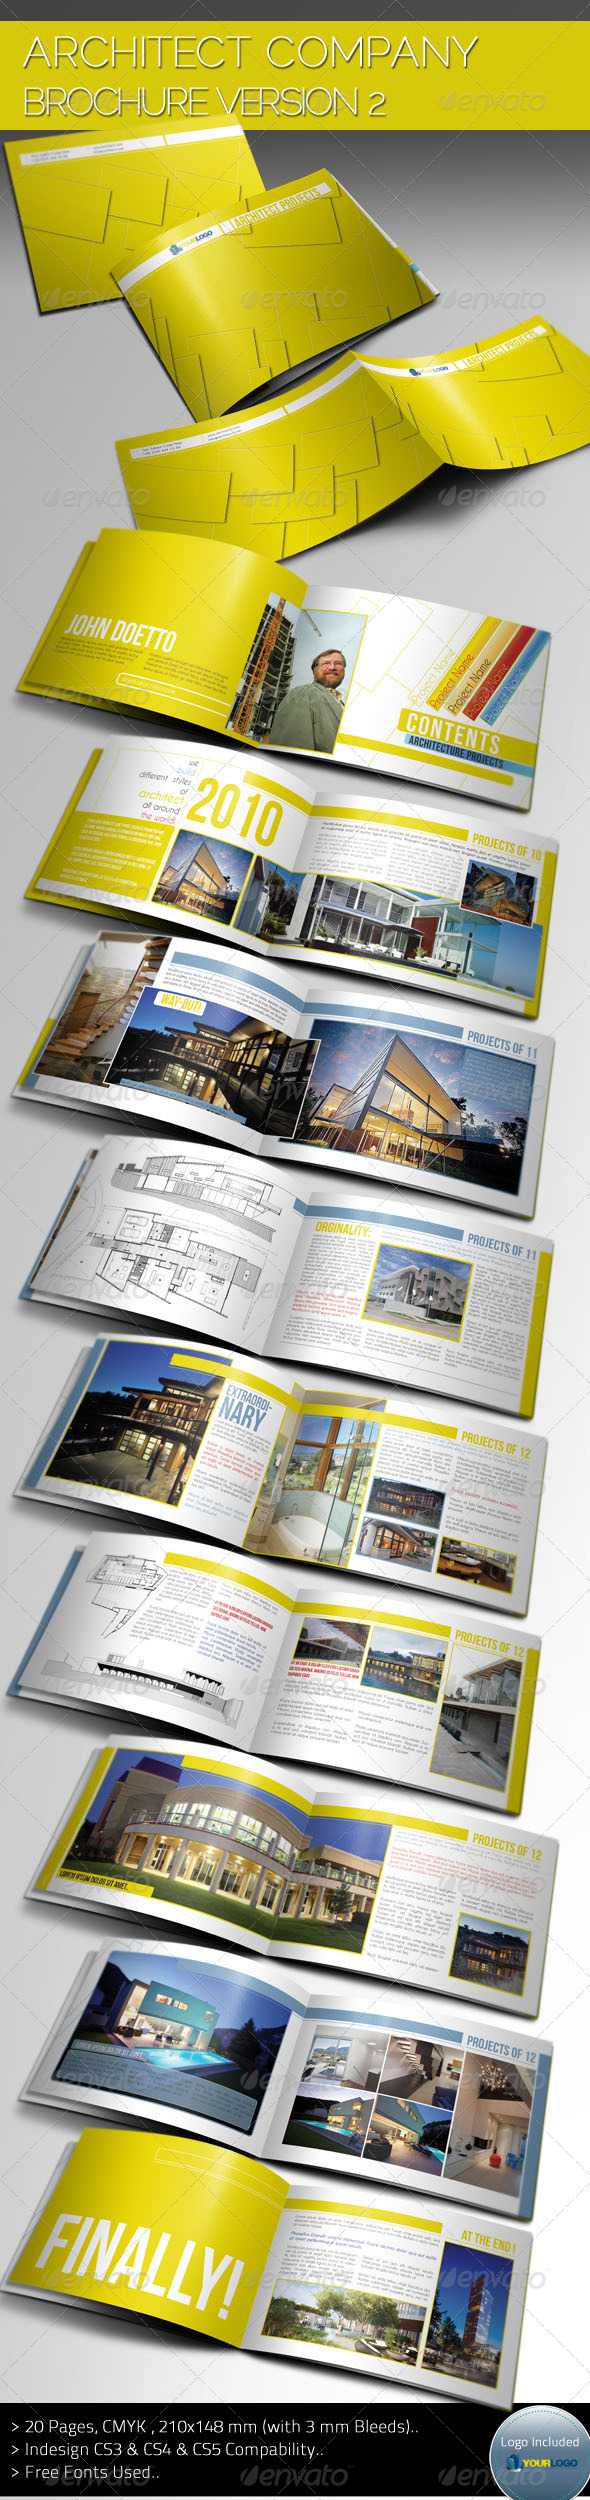 Indesign Brochure Template Graphics, Designs & Templates Pertaining To Architecture Brochure Templates Free Download